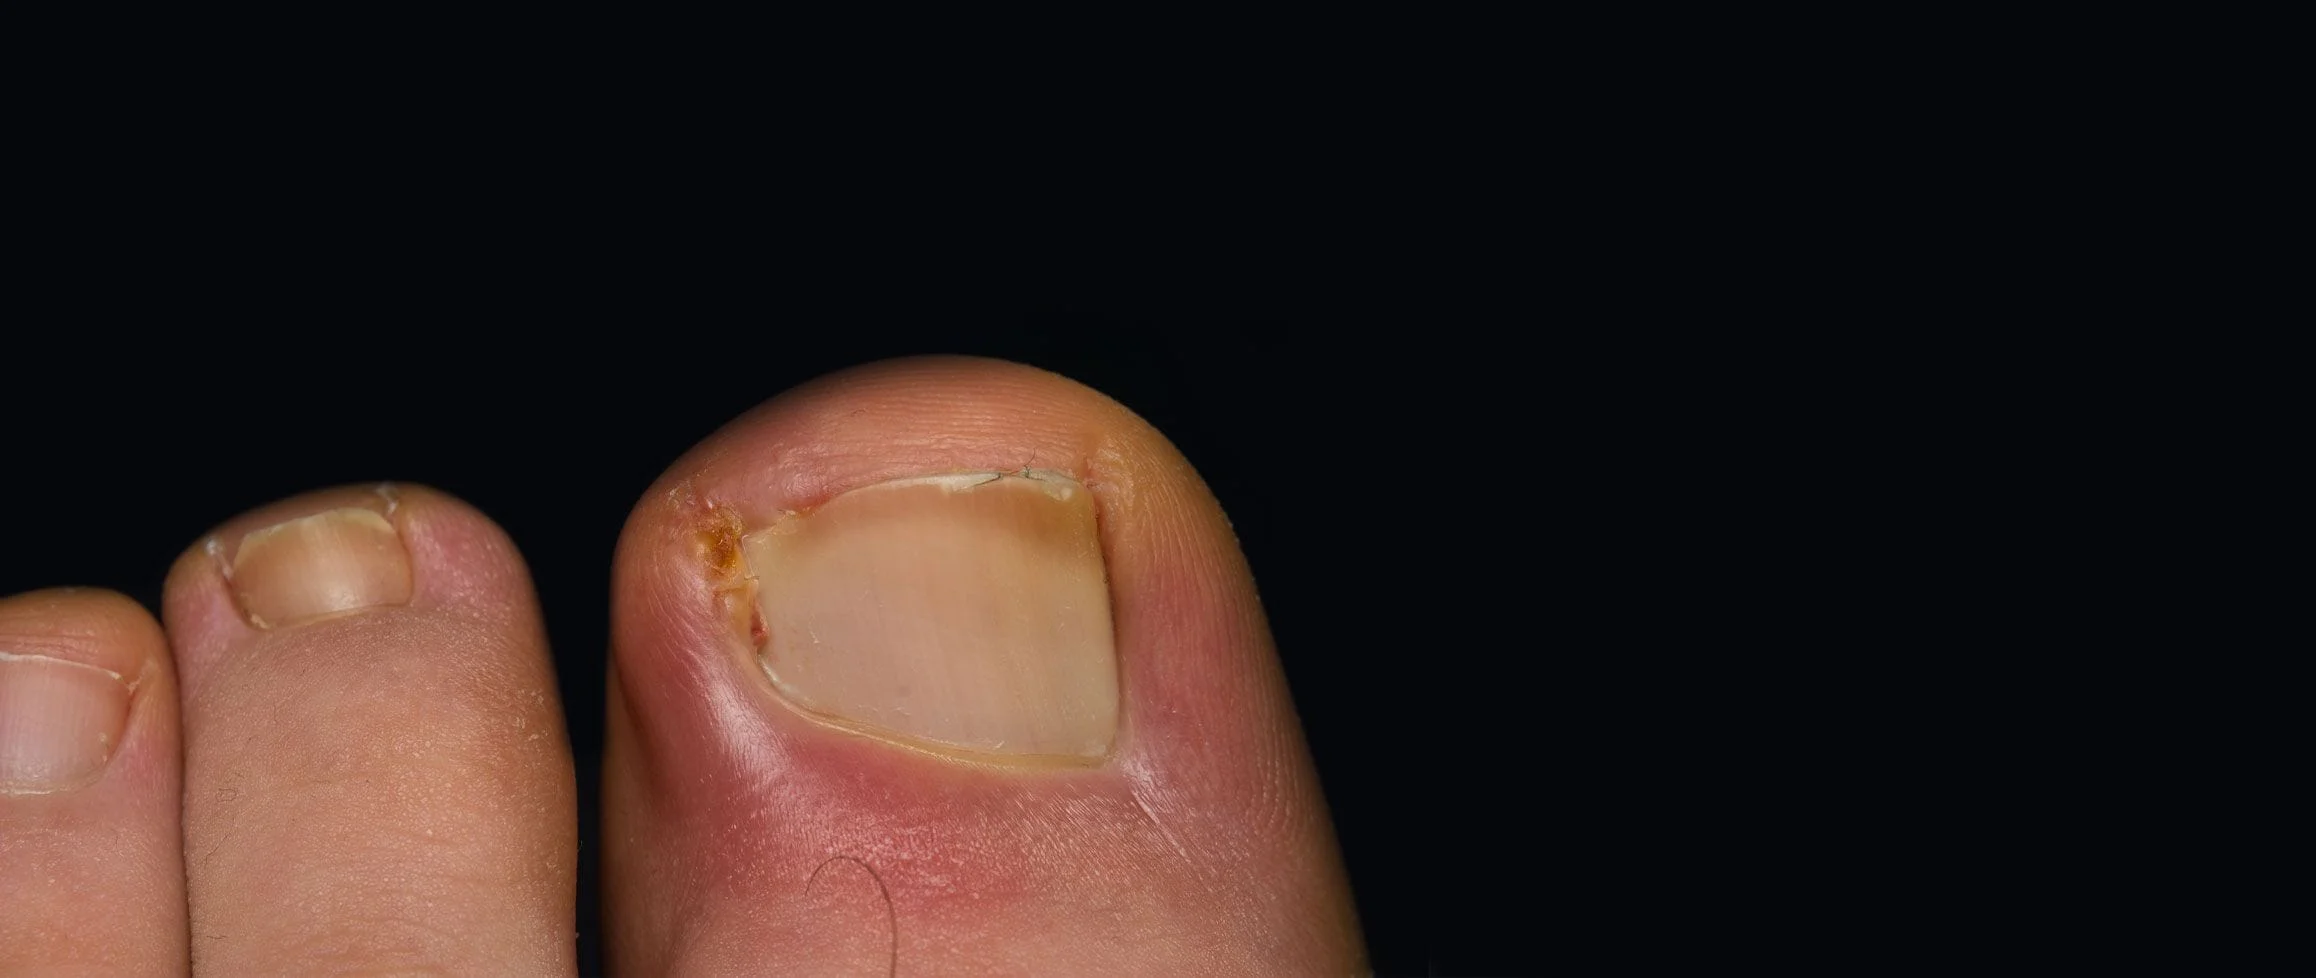 a picture of a painful in ingrown toenail